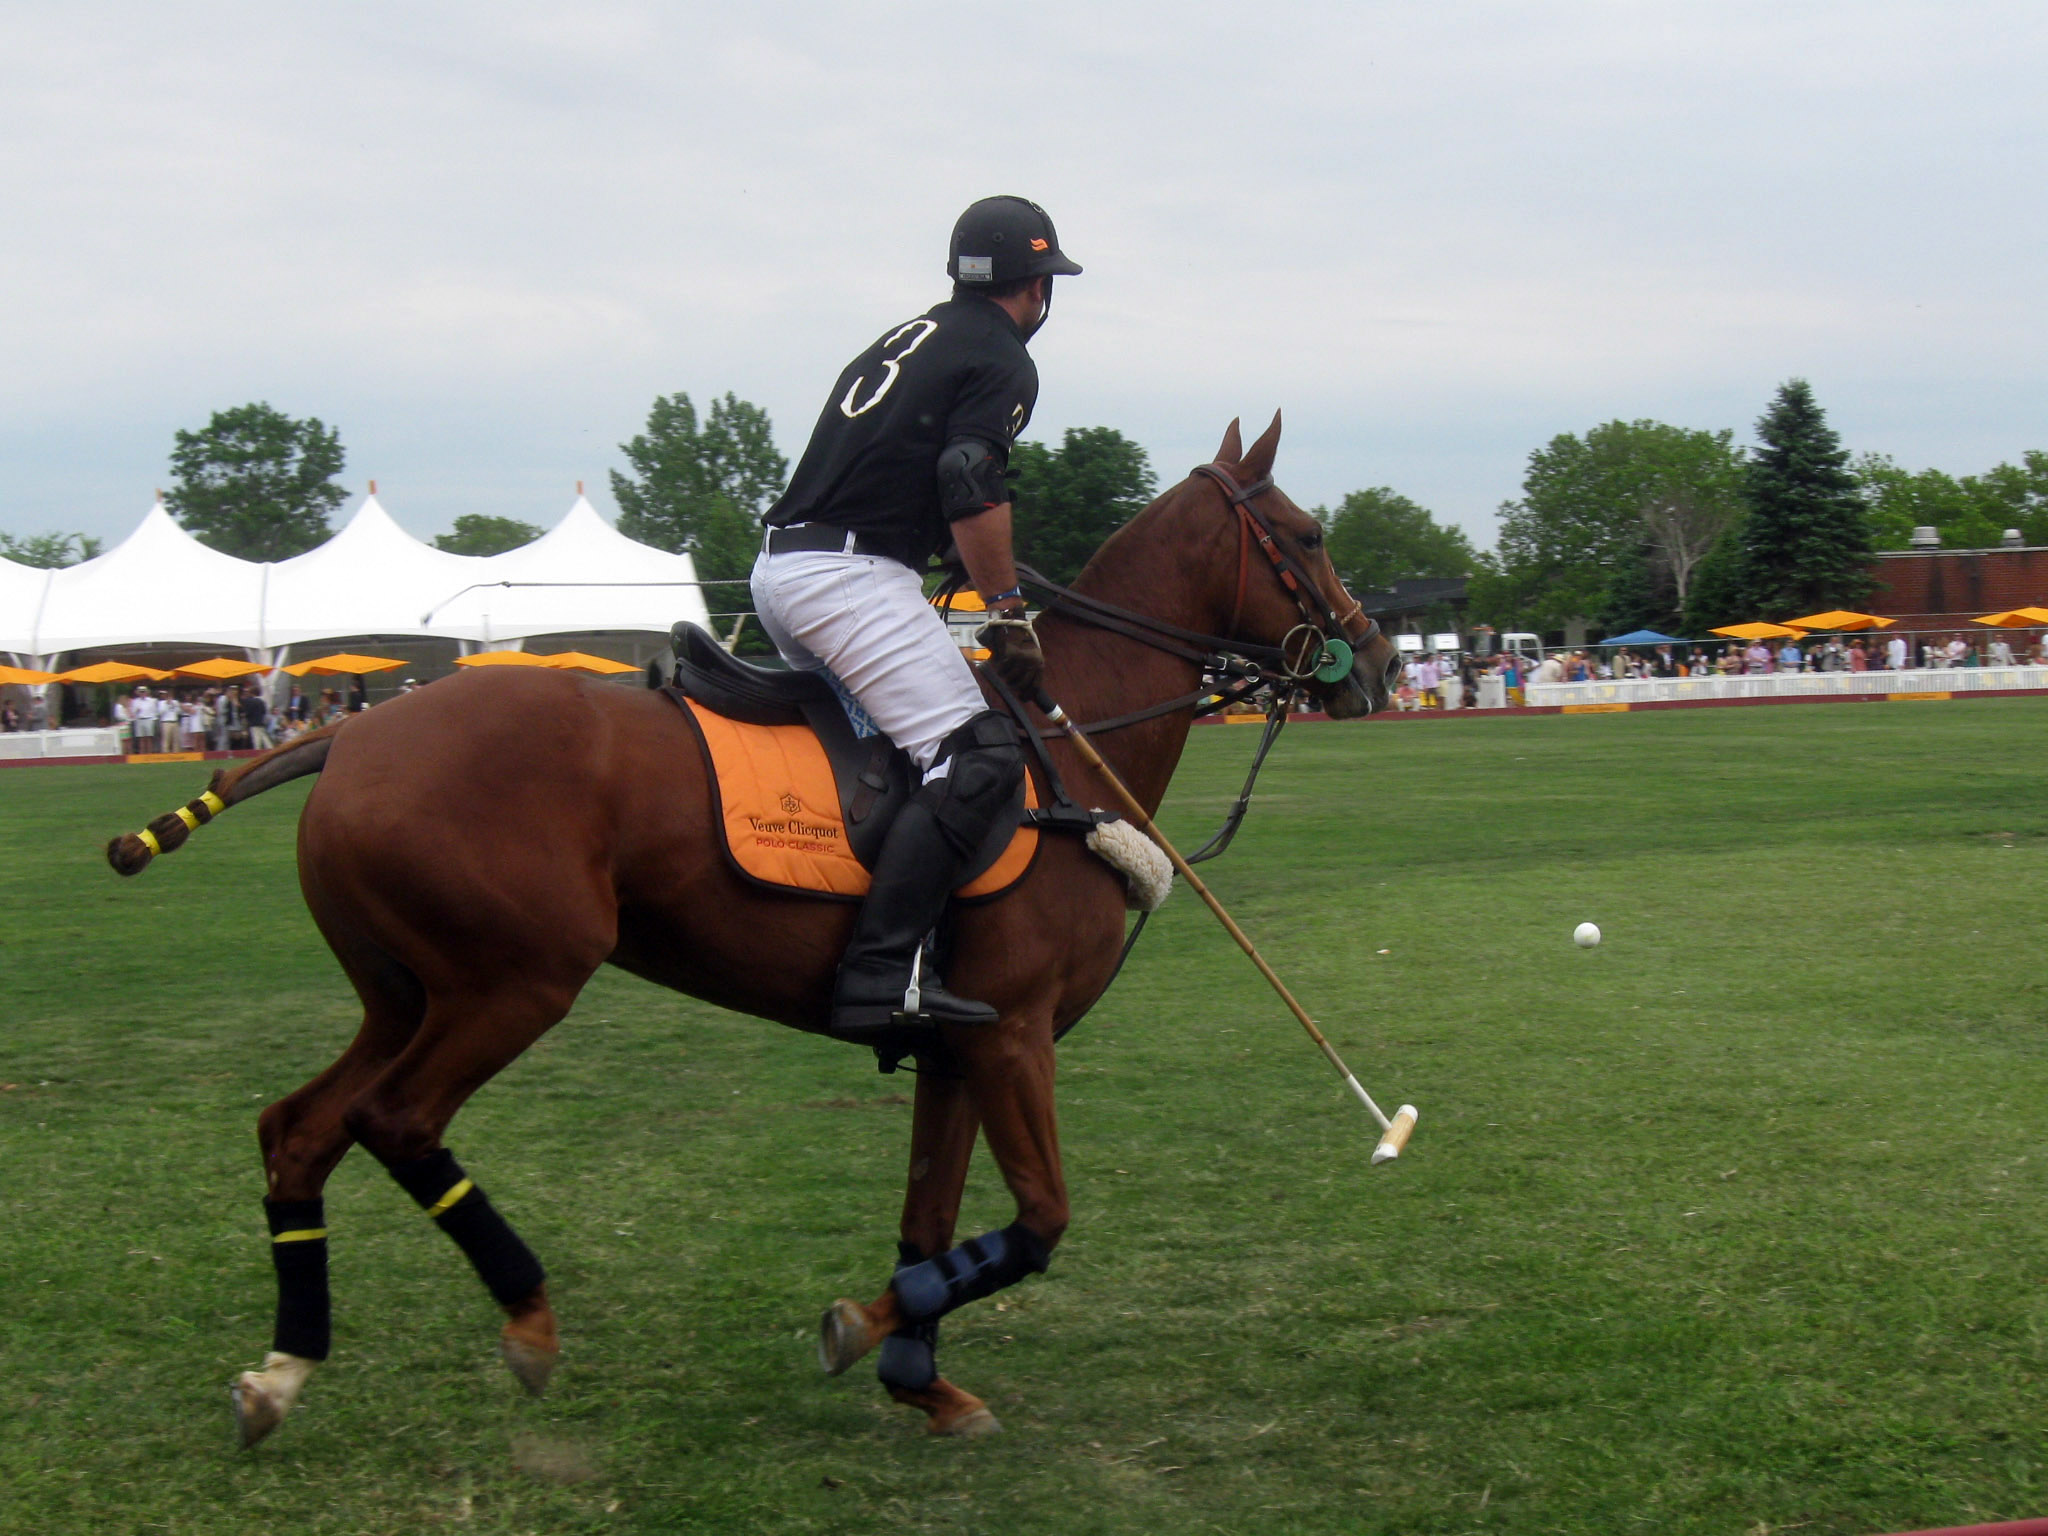 polo02 - CELEB POLO MATCH BRINGS OUT GRACE, GLAMOUR AND BEAUTY